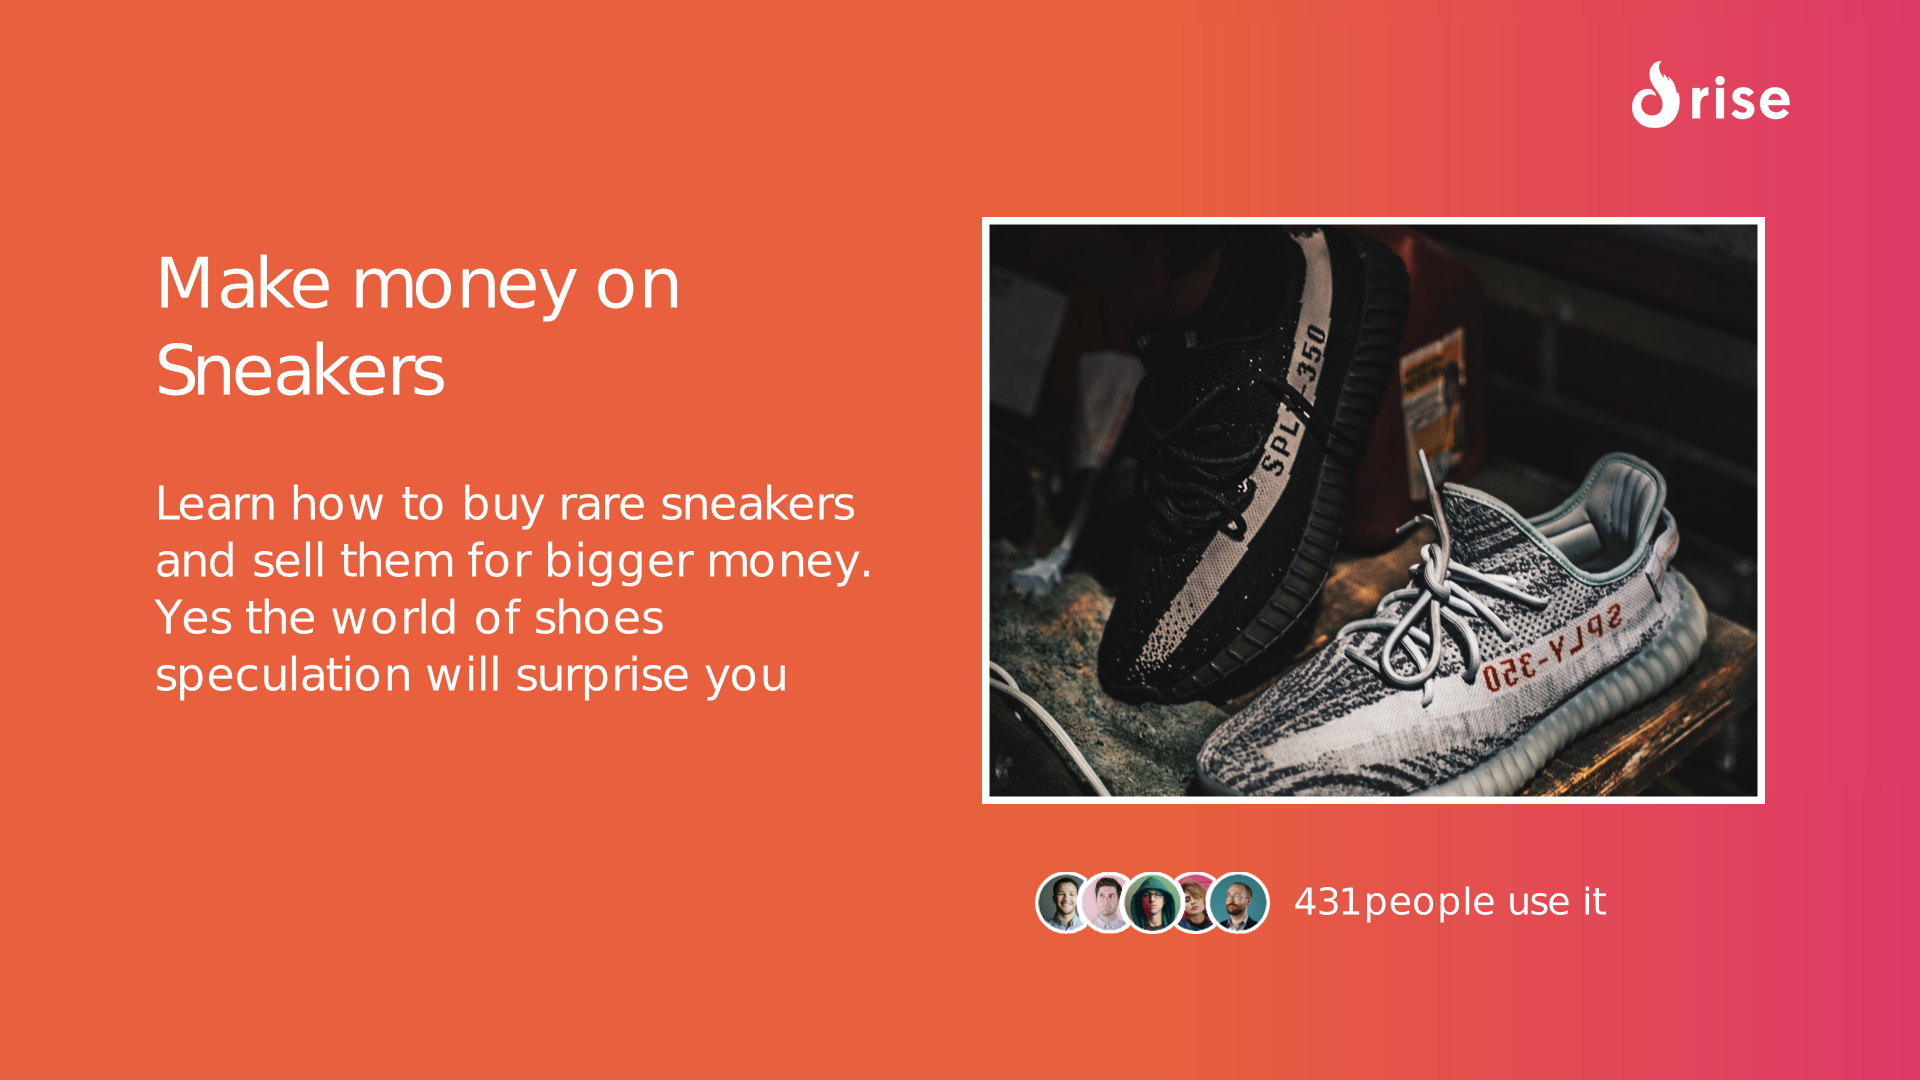 Make money on Sneakers